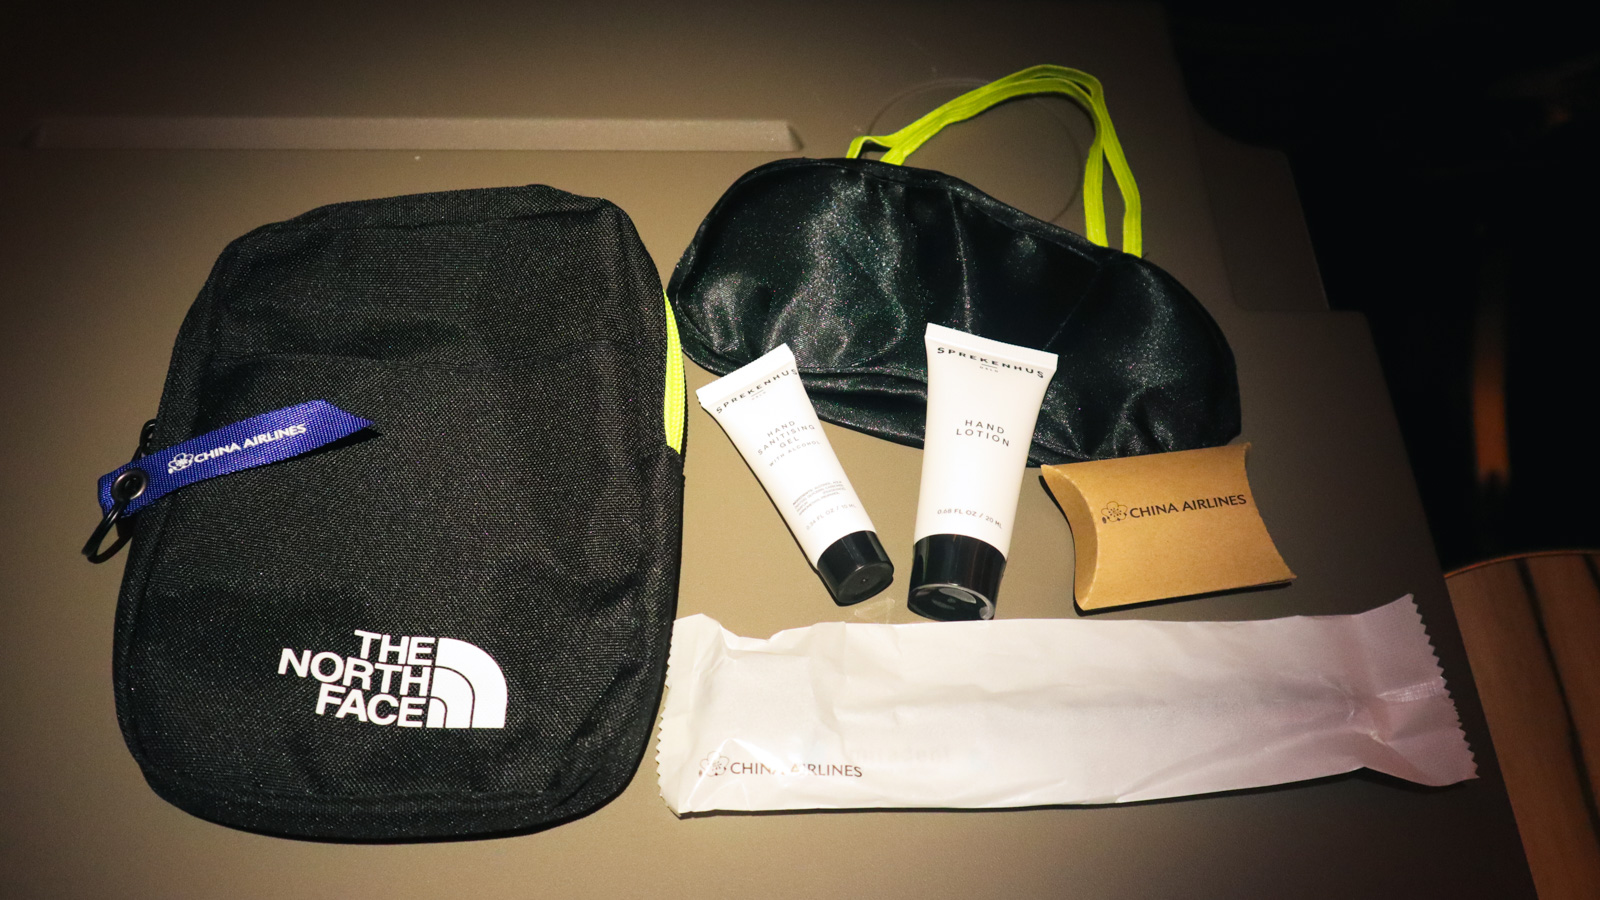 The North Face amenity kit contents